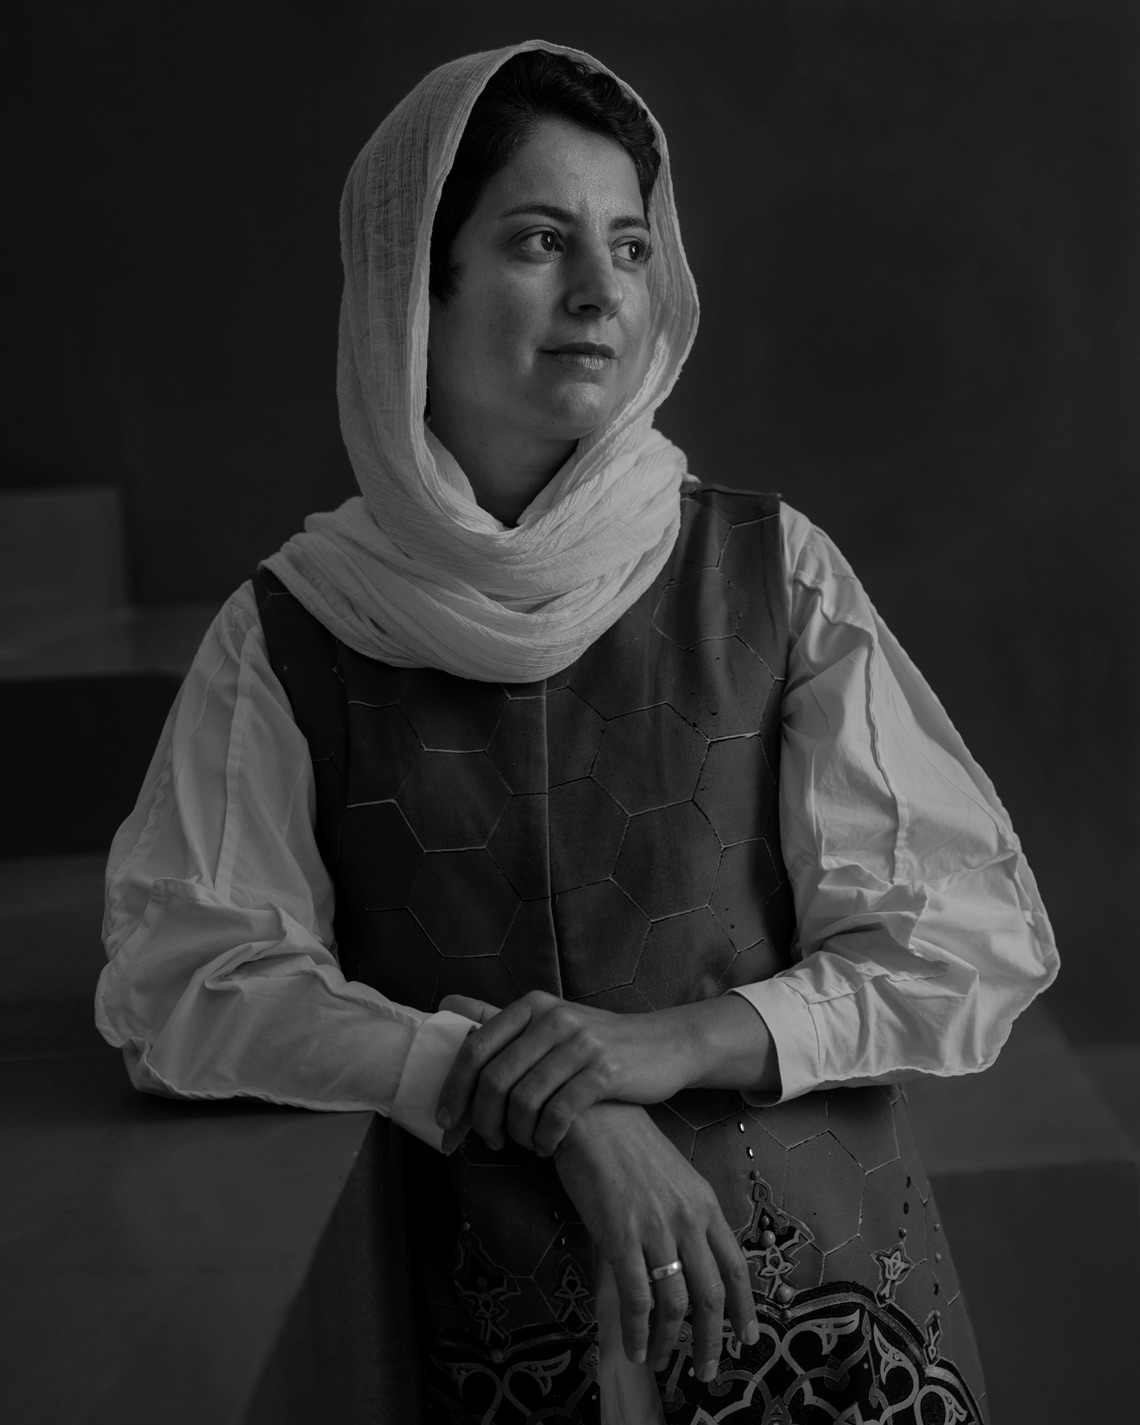 portraits of people from Iran at the Iran pavilion - **ADD EVENT ID - [MEPXXXXX]**